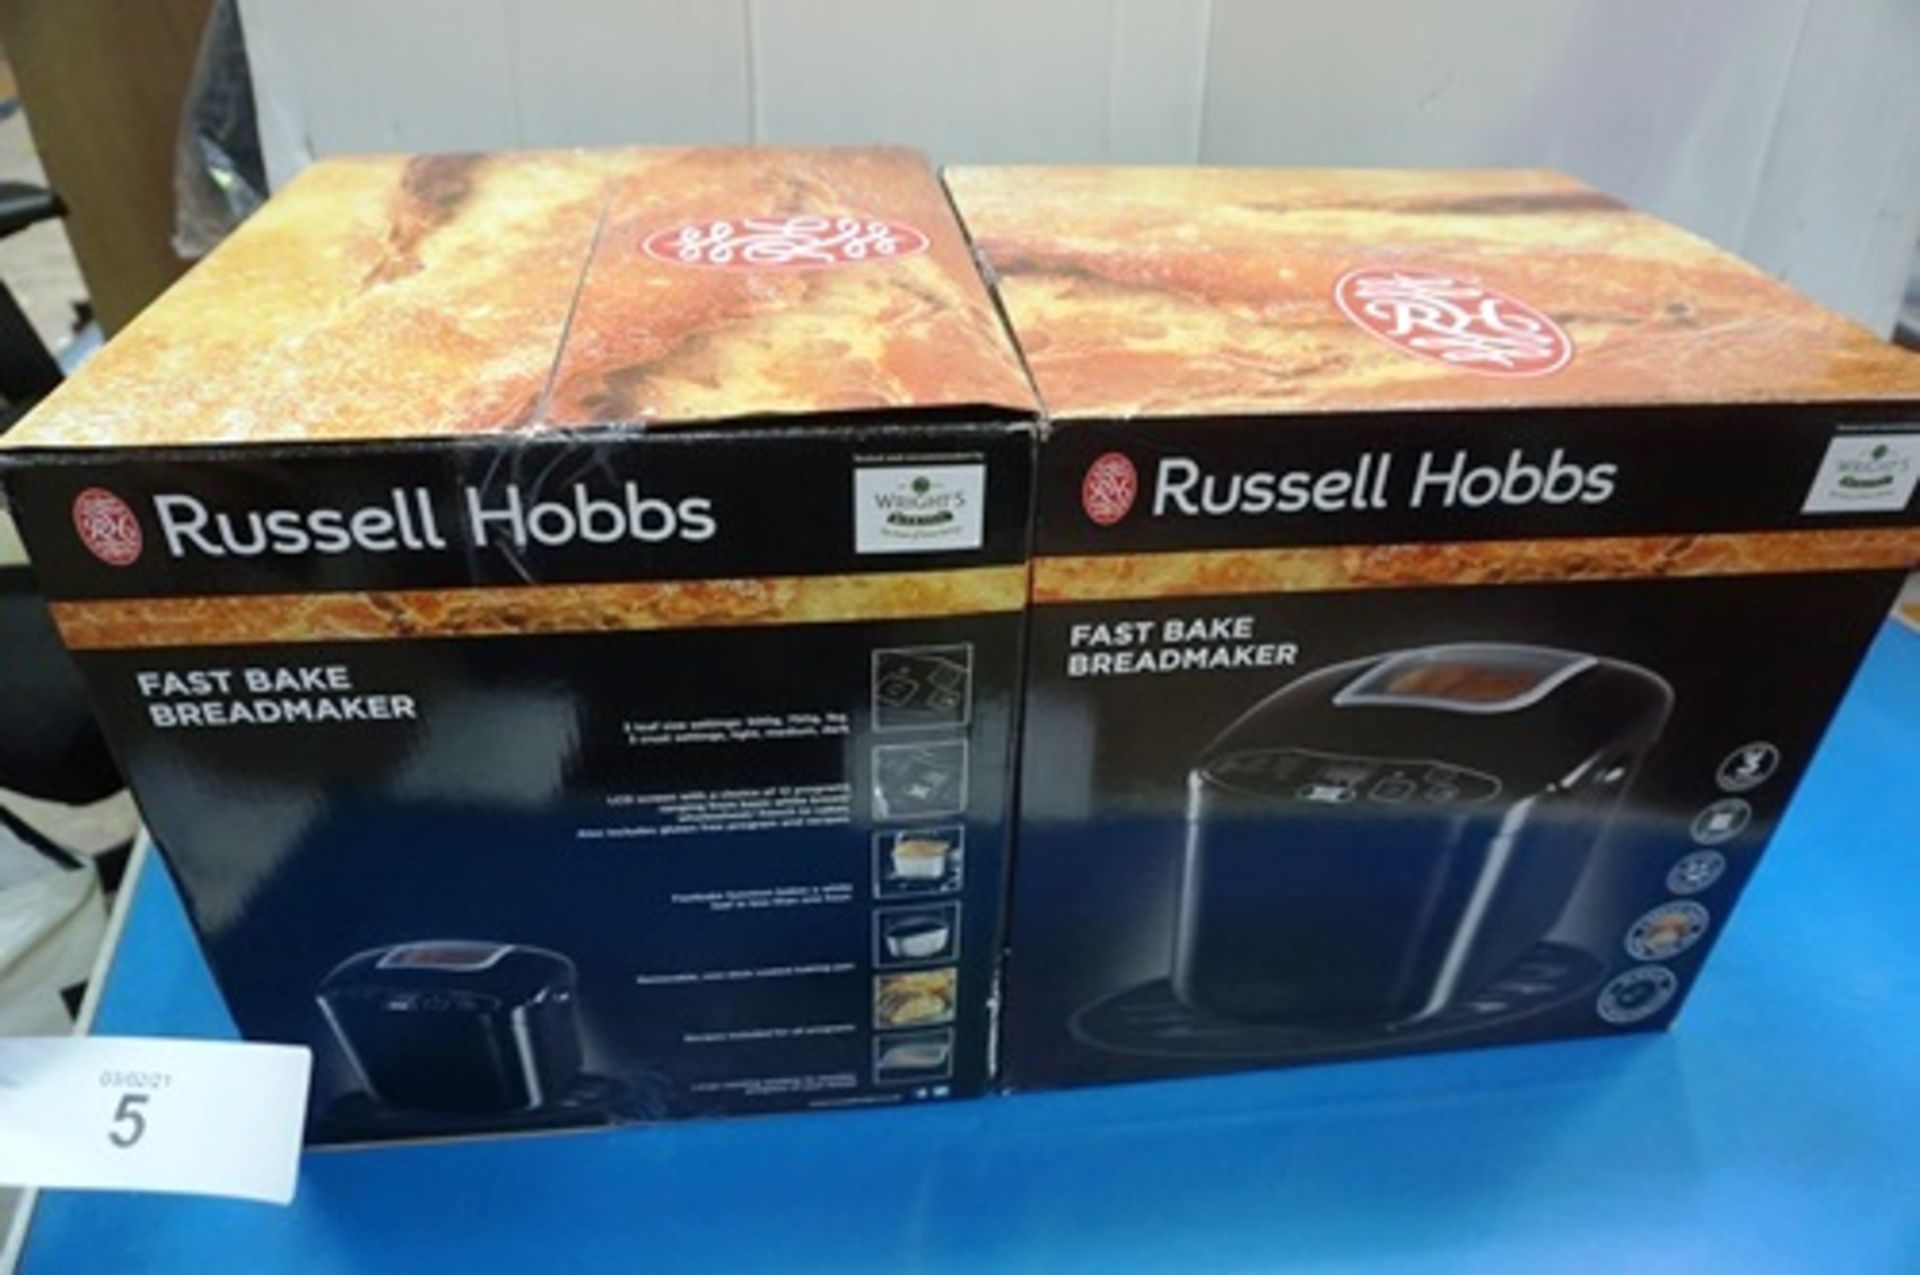 2 x Russell Hobbs Fast Bake bread makers, model 23620 - New in box (ES7) - Image 2 of 2